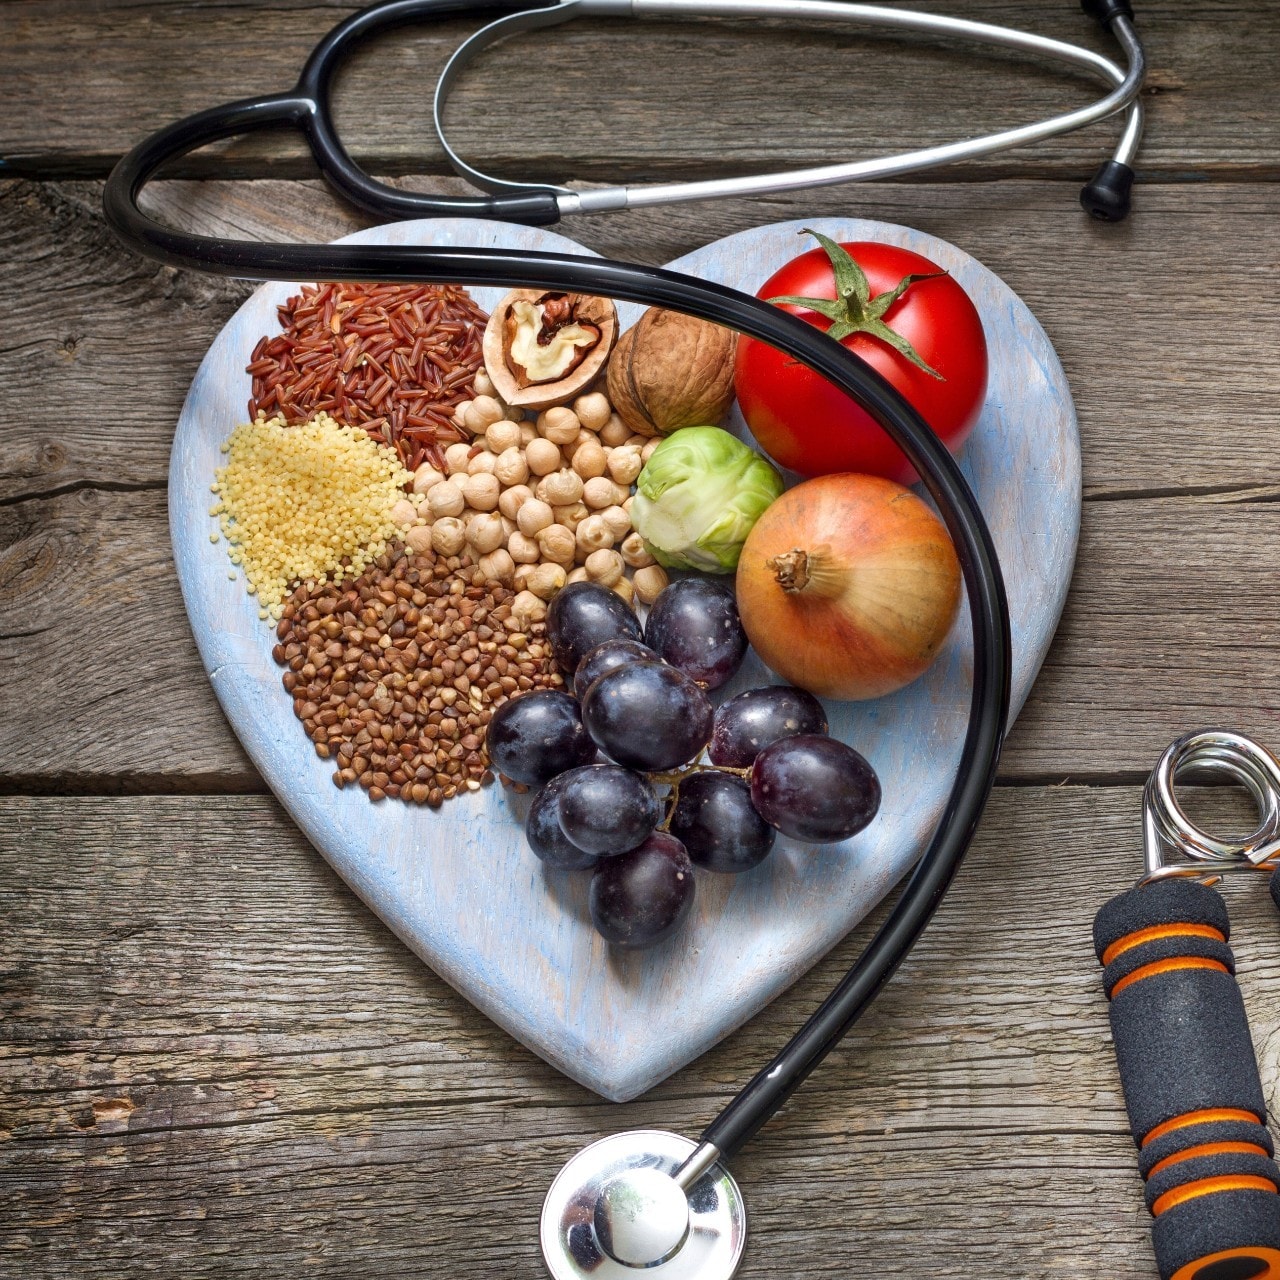 Heathly food arranged on a heart-shaped plate surrounded by a stethoscope and gym gear